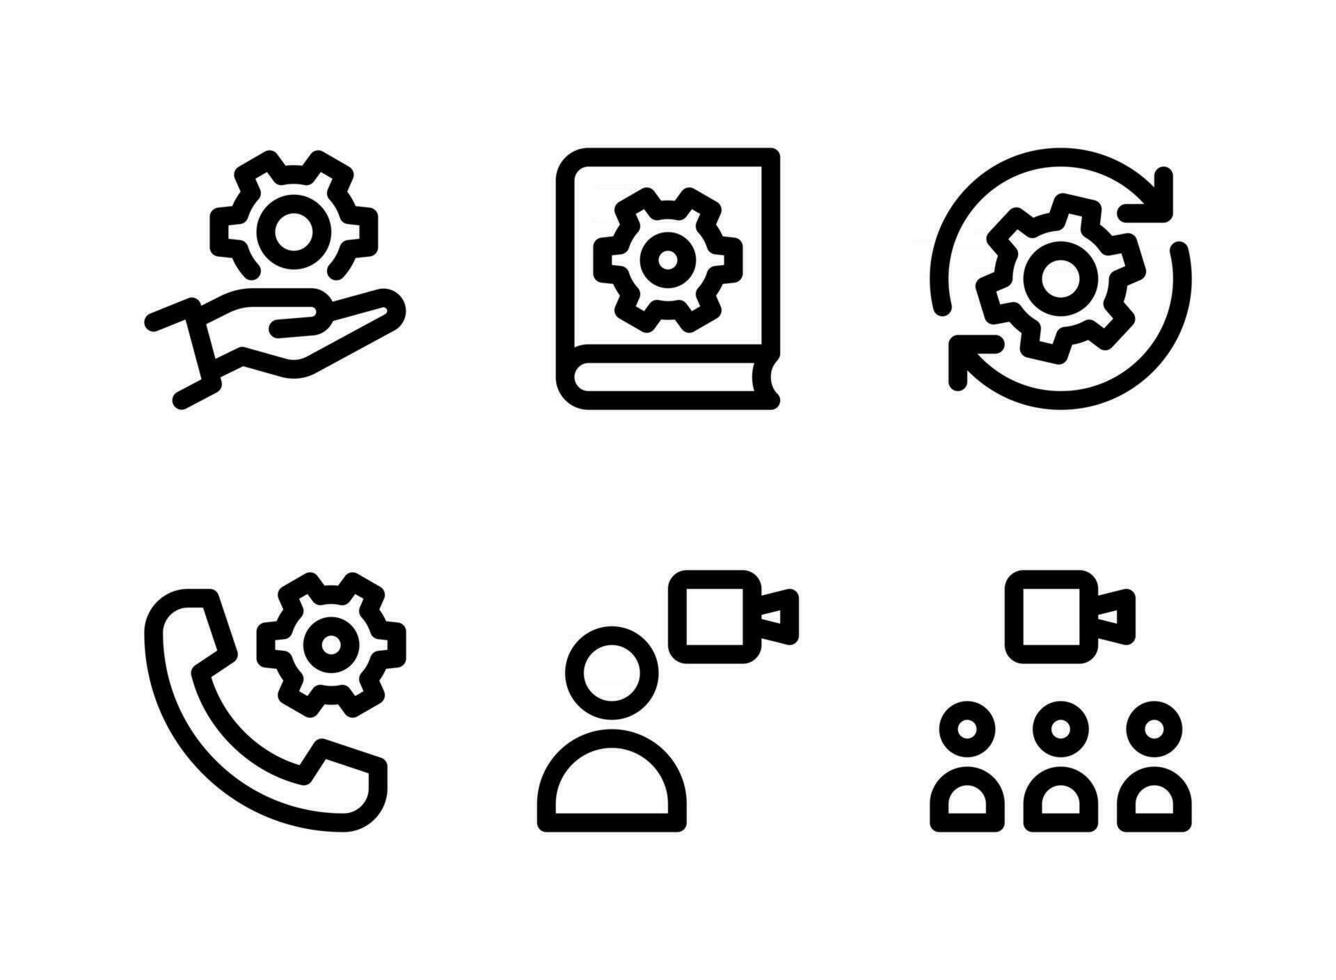 Simple Set of Help and Support Related Vector Line Icons. Contains Icons as System Configuration, Manual Book, Video Call and more.